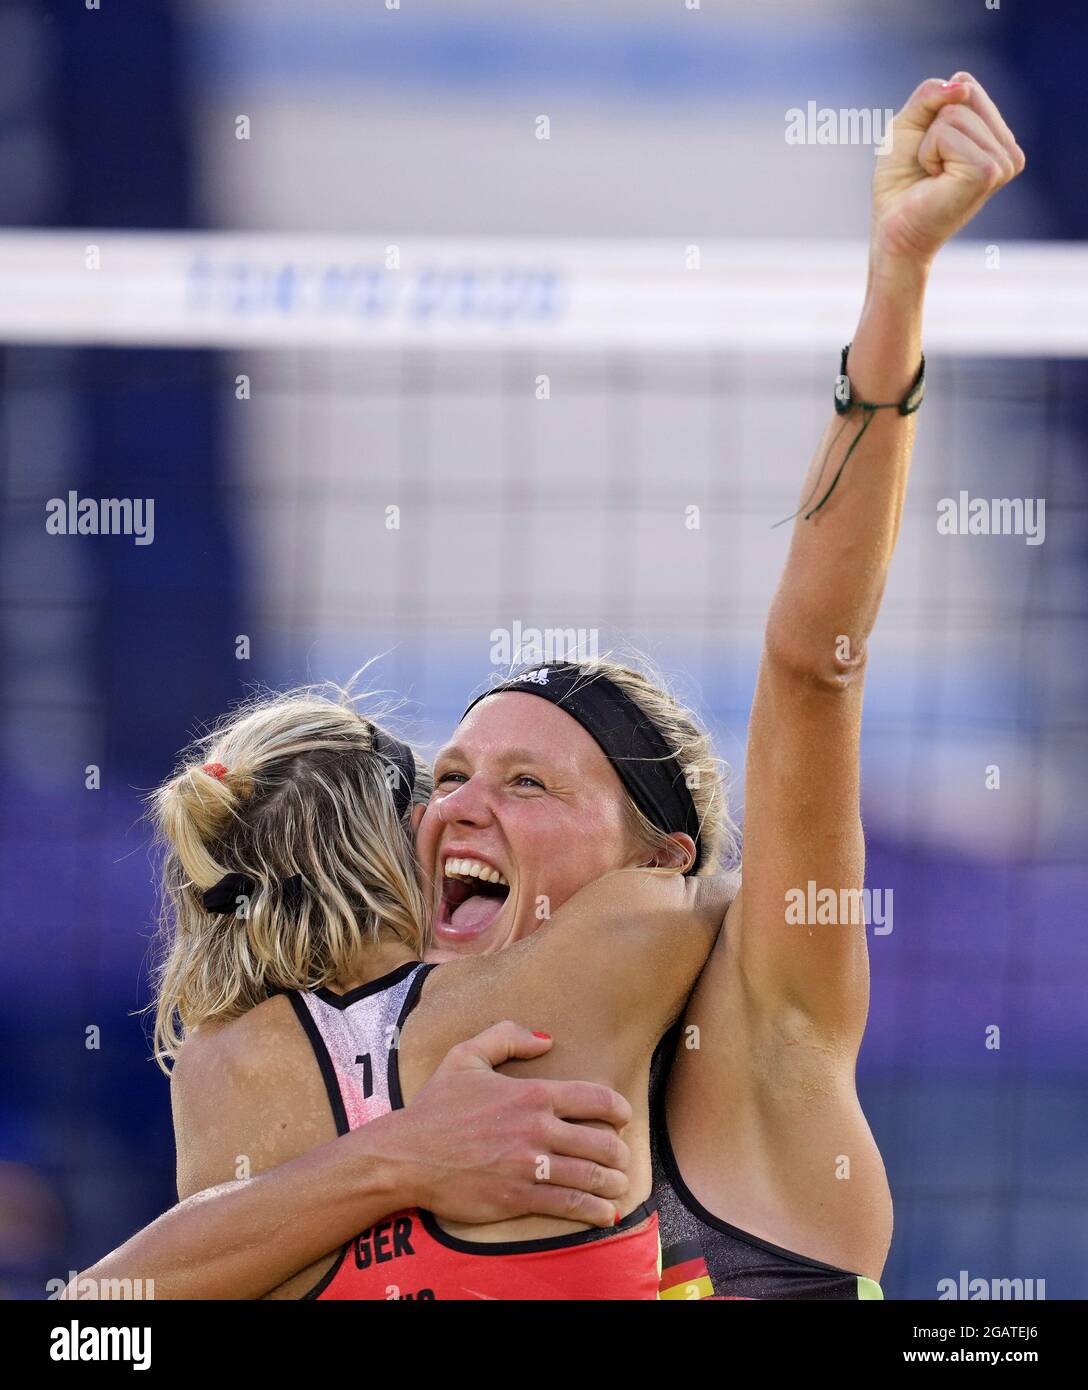 Tokyo, Japan. 1st Aug, 2021. Margareta Kozuch (R) /Laura Ludwig of Germany celebrate the victory after the women's beach volleyball round of 16 match against Agatha Bednarczuk/Eduarda Santos Lisboa of Brazil at the Tokyo 2020 Olympic Games in Tokyo, Japan, Aug. 1, 2021. Credit: Li He/Xinhua/Alamy Live News Stock Photo